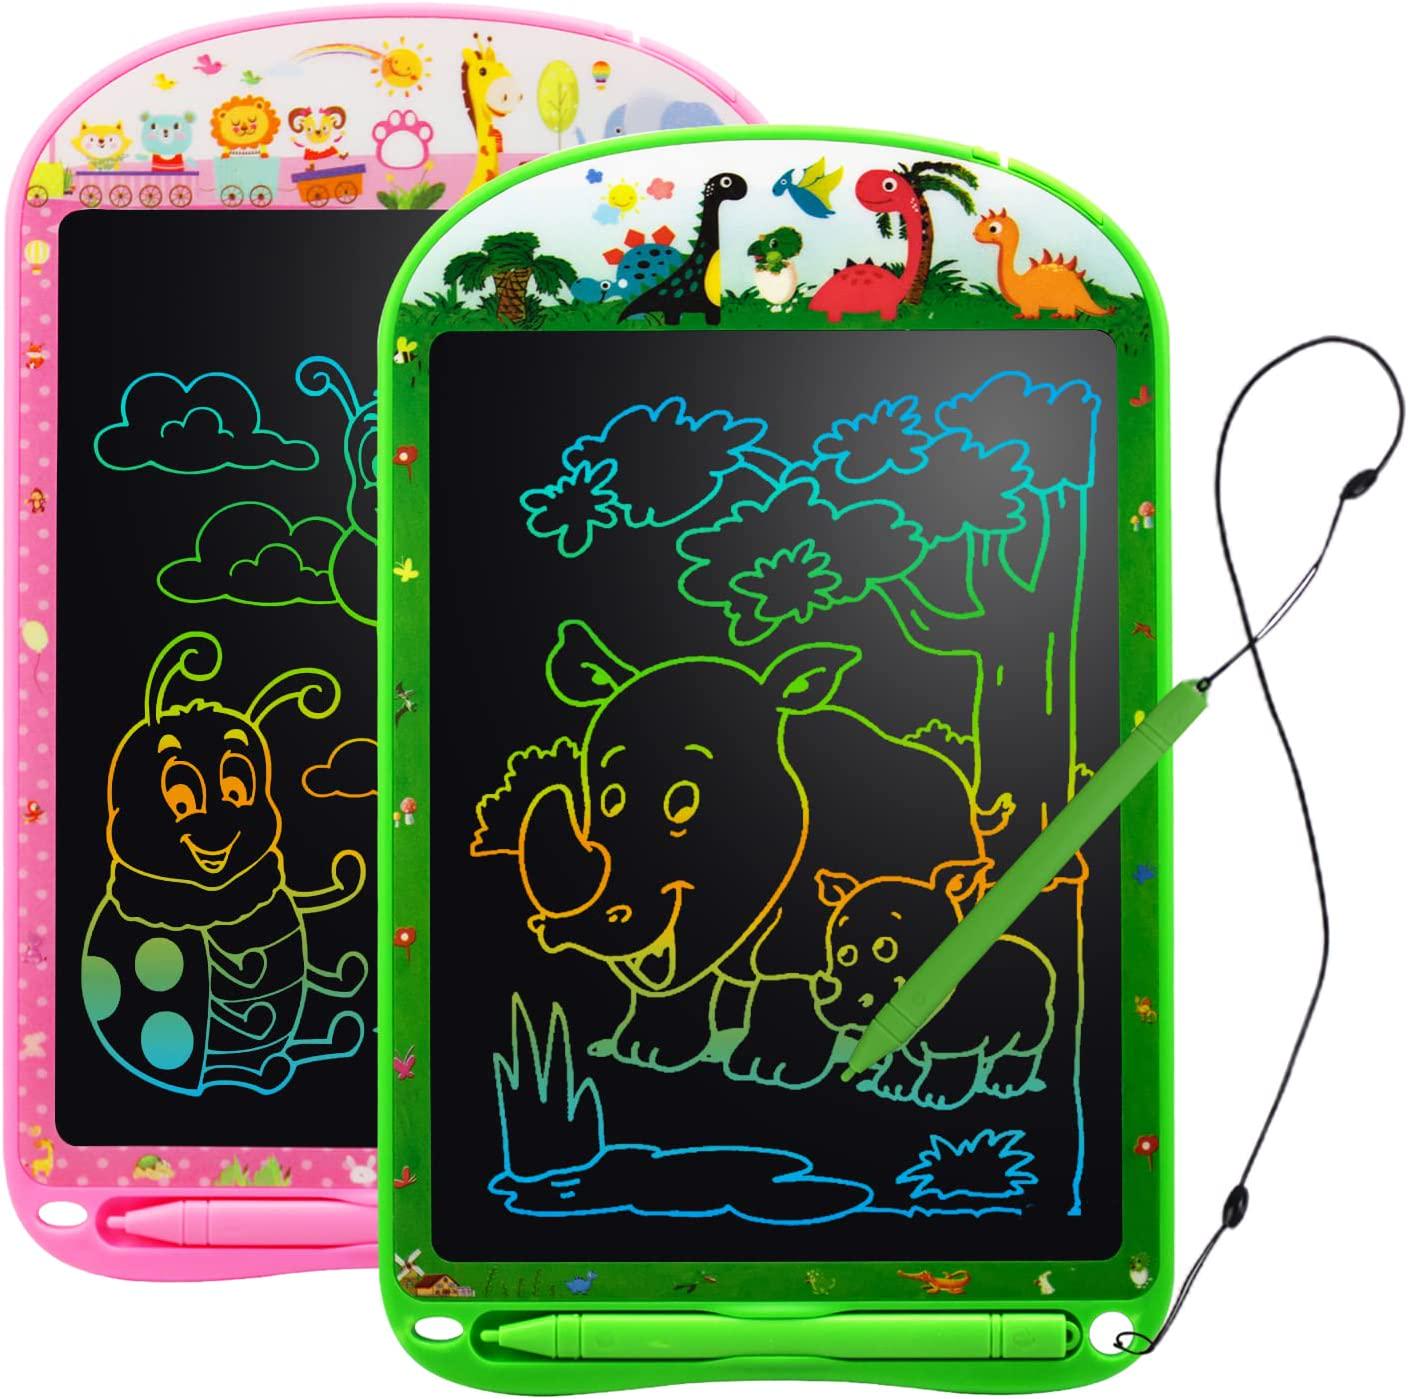 surekuo, LCD Writing Tablet for Kids, 2 Pack 10inch Drawing Board with Colorful Screen, Erasable and Reusable Drawing Tablet, Dinosaur &Animal Themes Birthday Gifts for 3-8 Years Old Girls Pink+Green